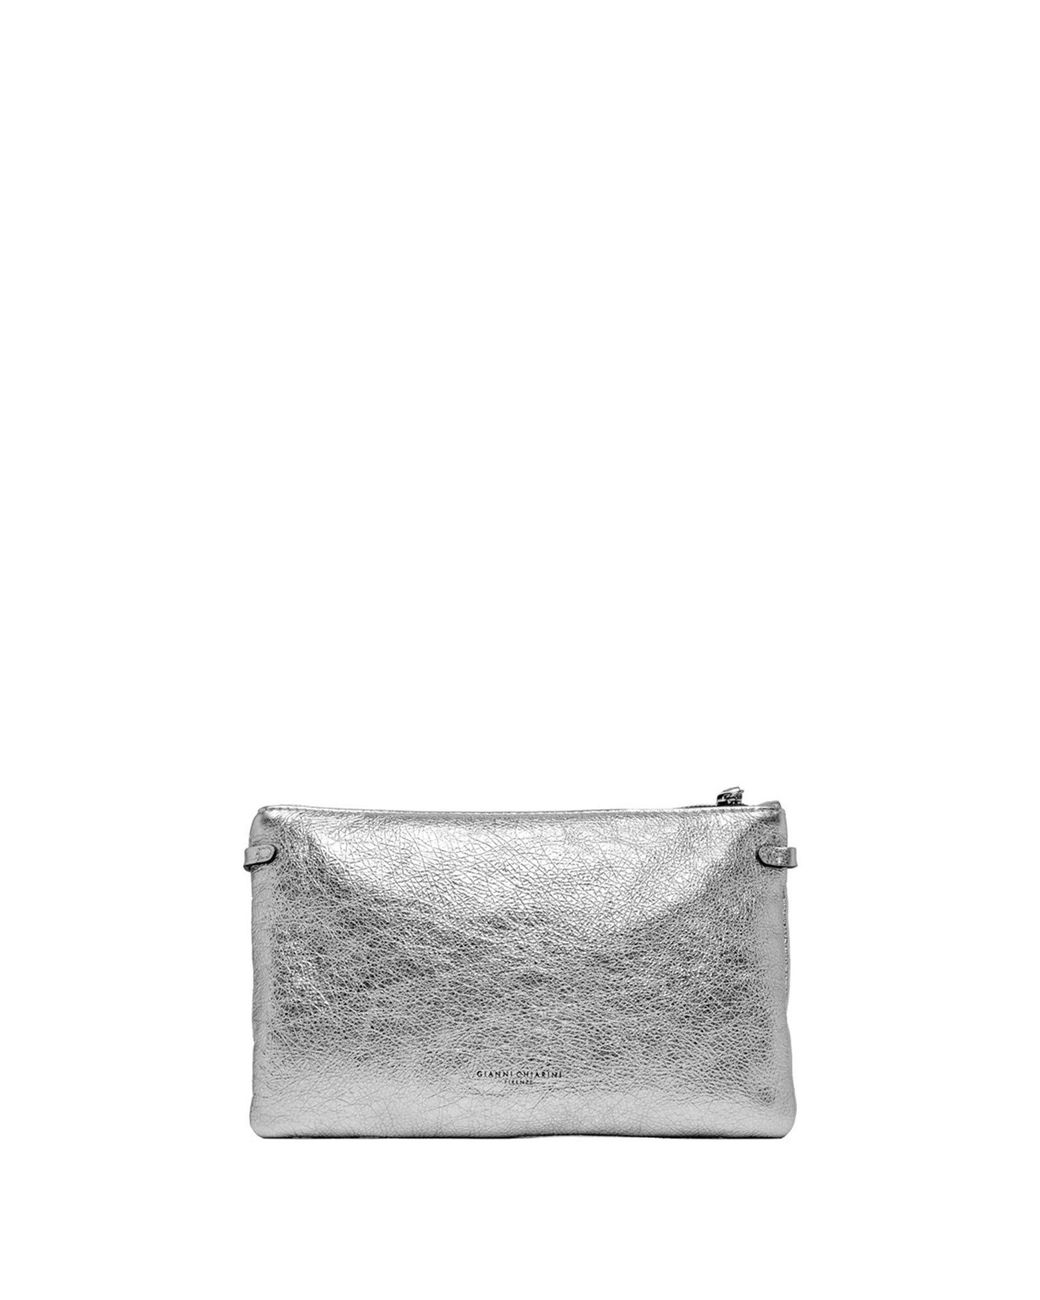 Gianni Chiarini Hermy Pouch In Laminated Leather in Gray | Lyst